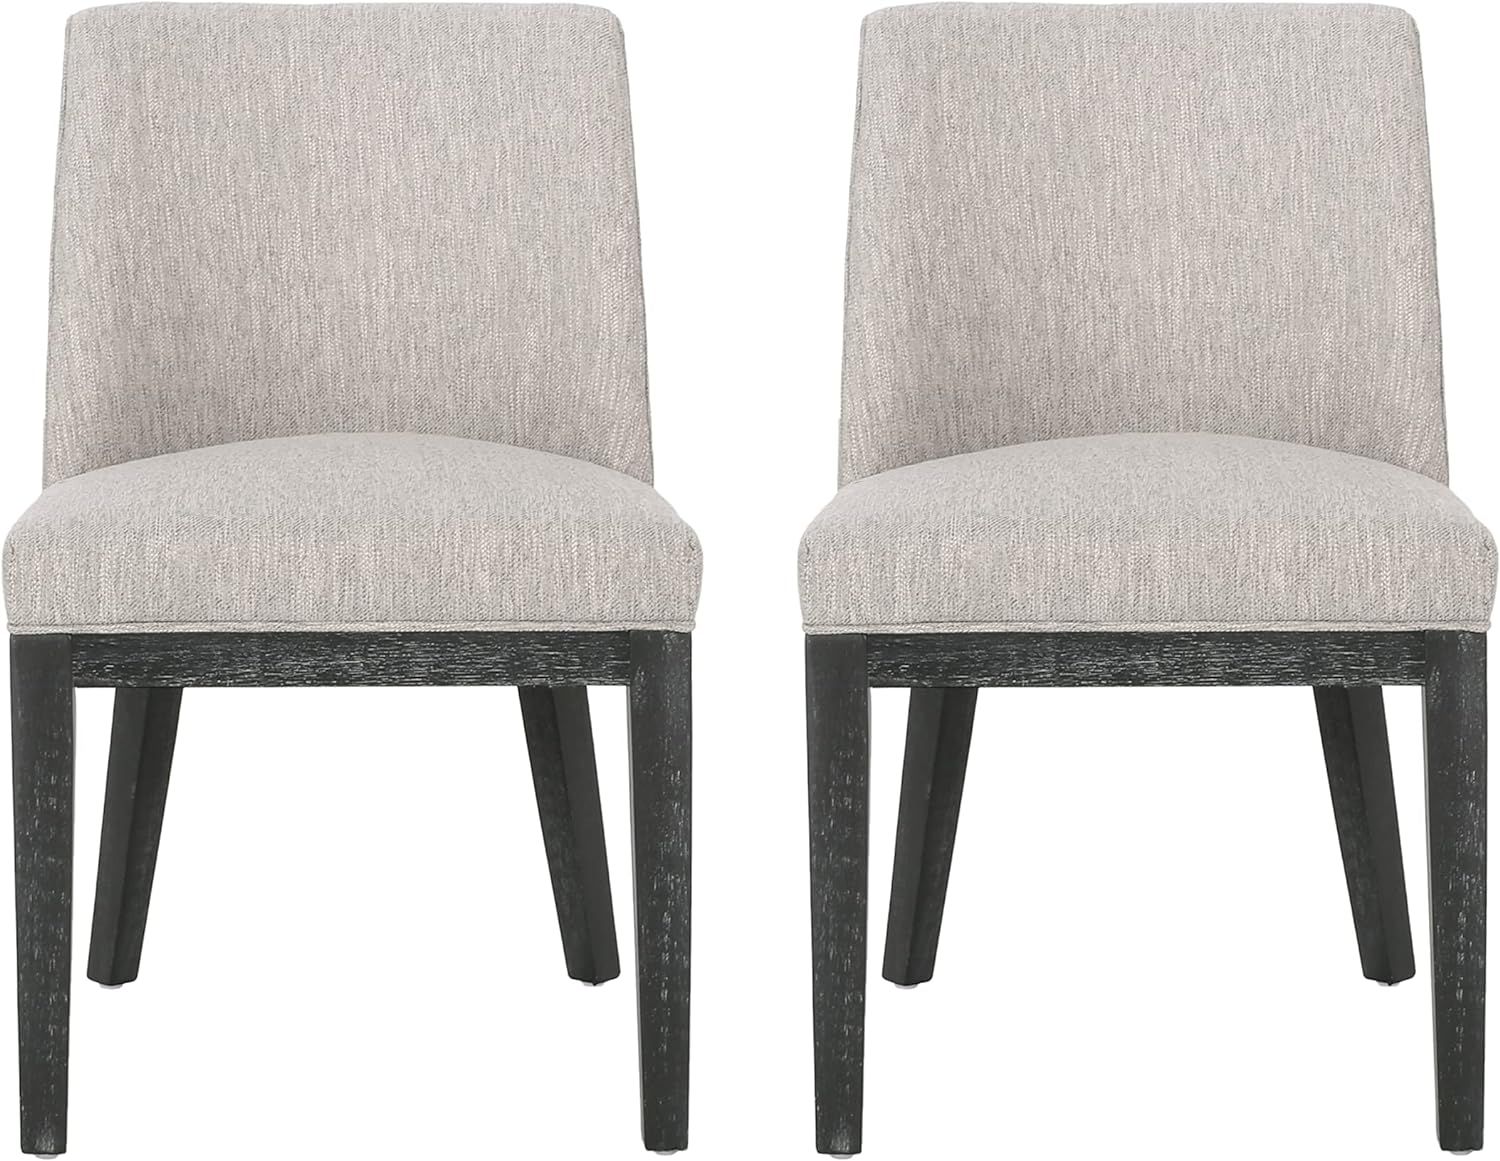 Christopher Knight Home Camas Dining Chair, Light Gray + Weathered Gray | Amazon (US)